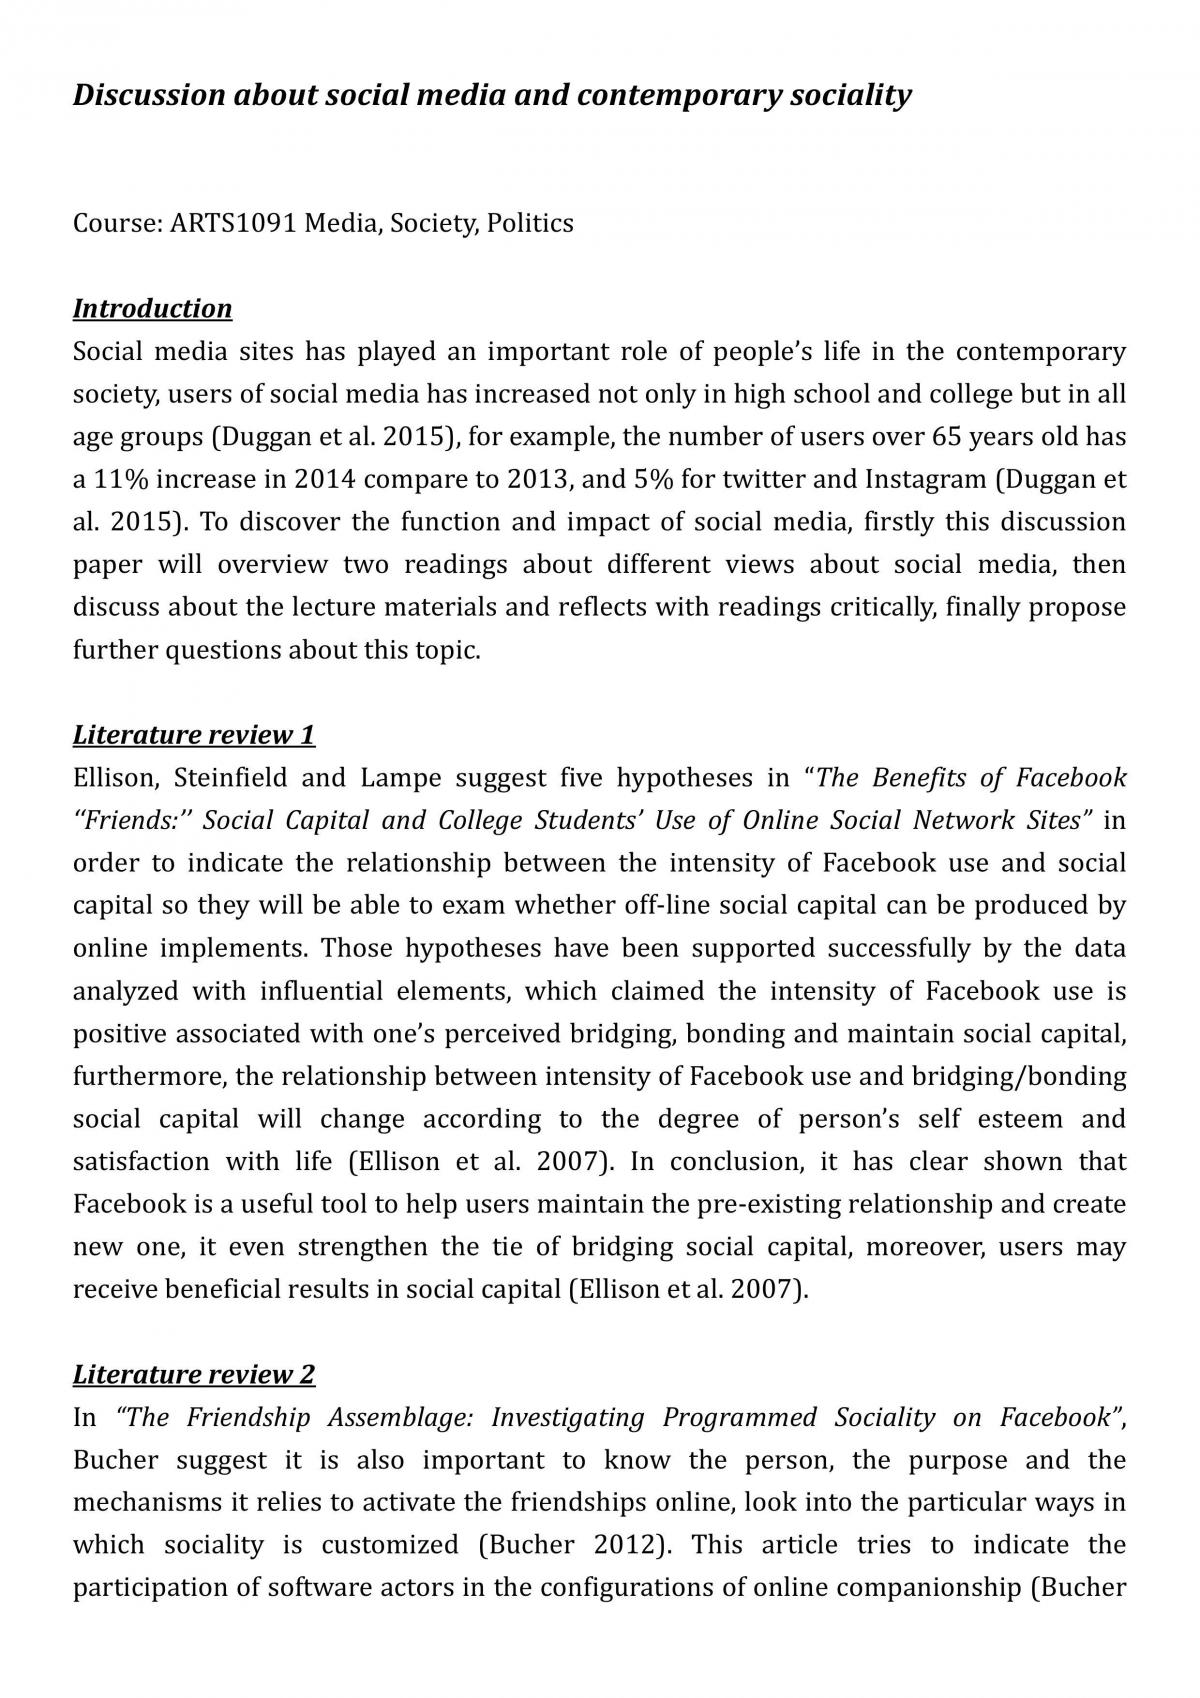 Discussion Paper Template Word